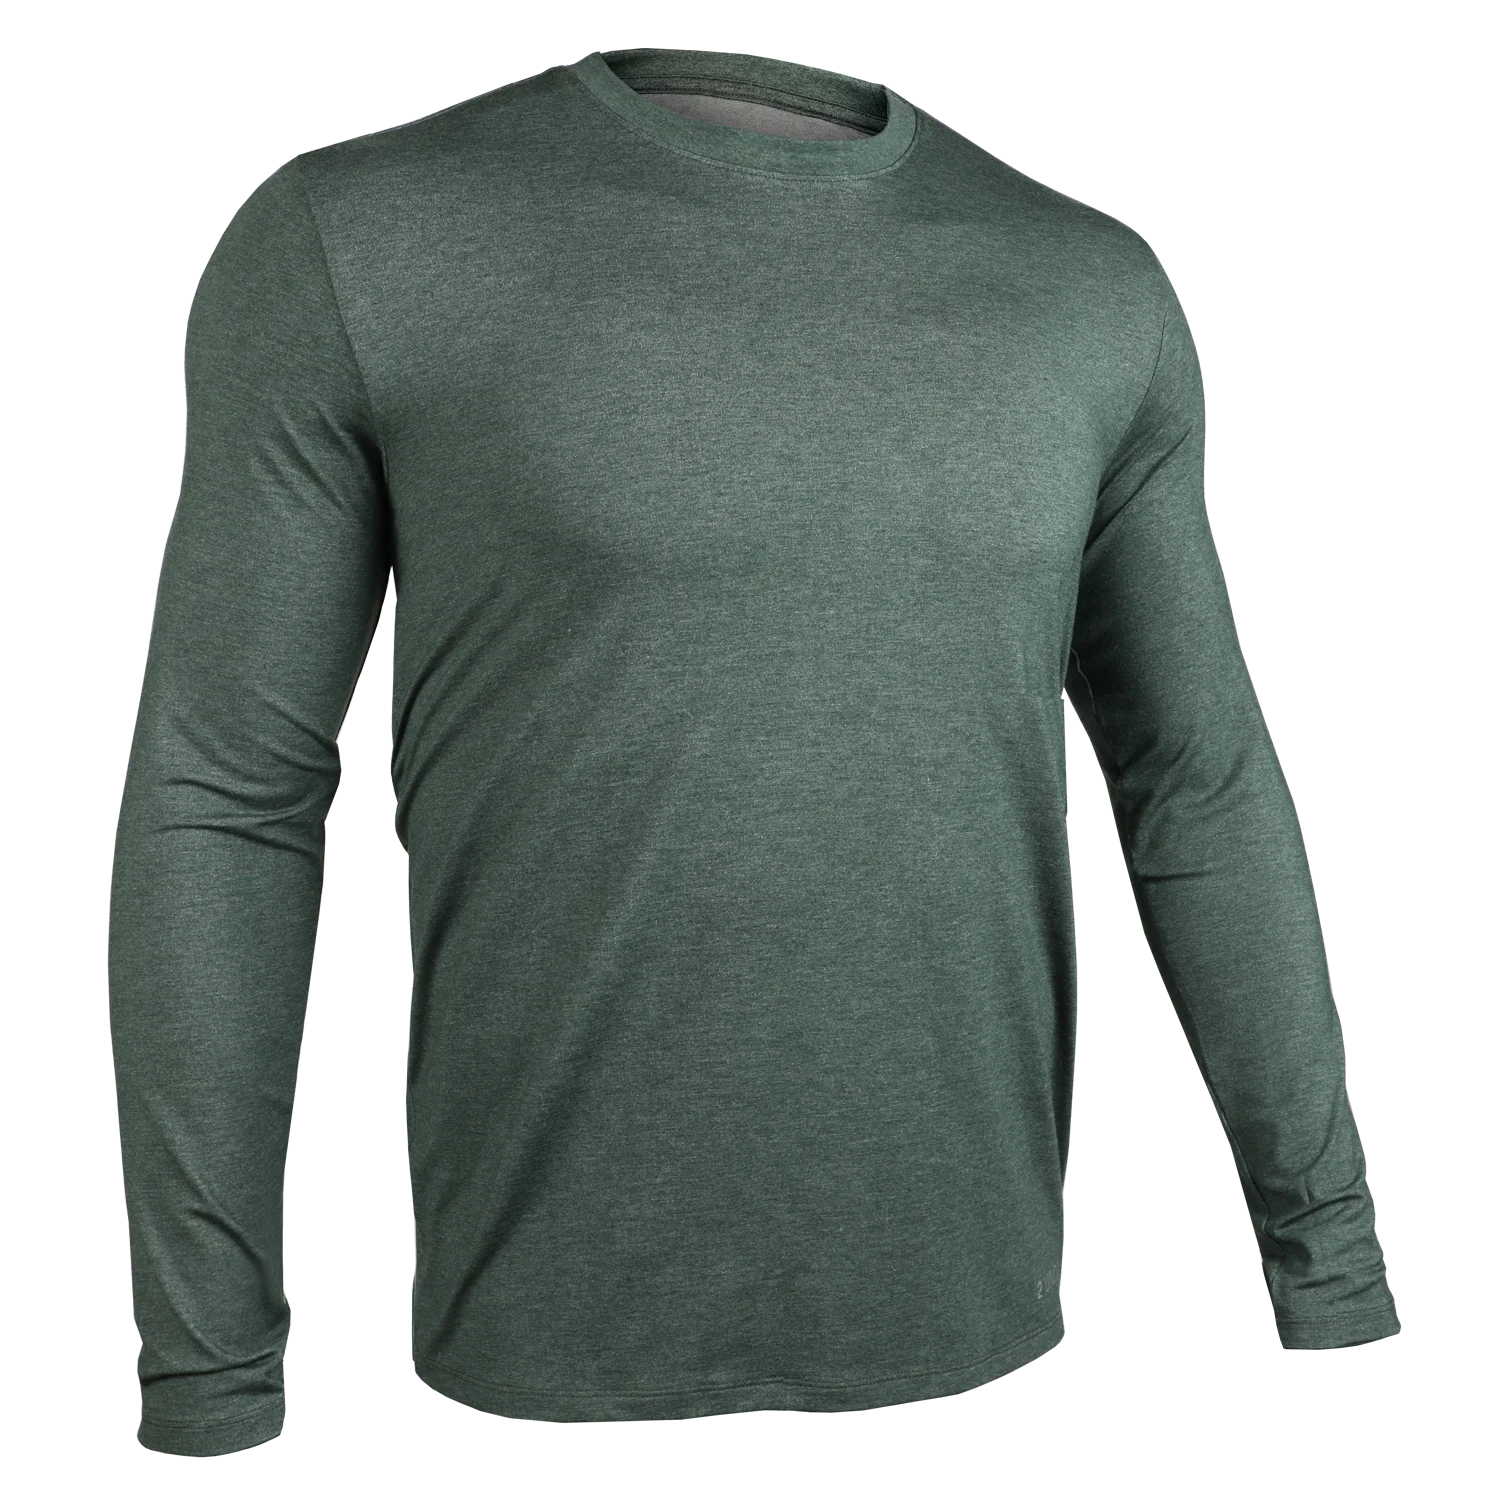 Buy heathered-forest-green 2Undr Luxe Long Sleeve Crew tee